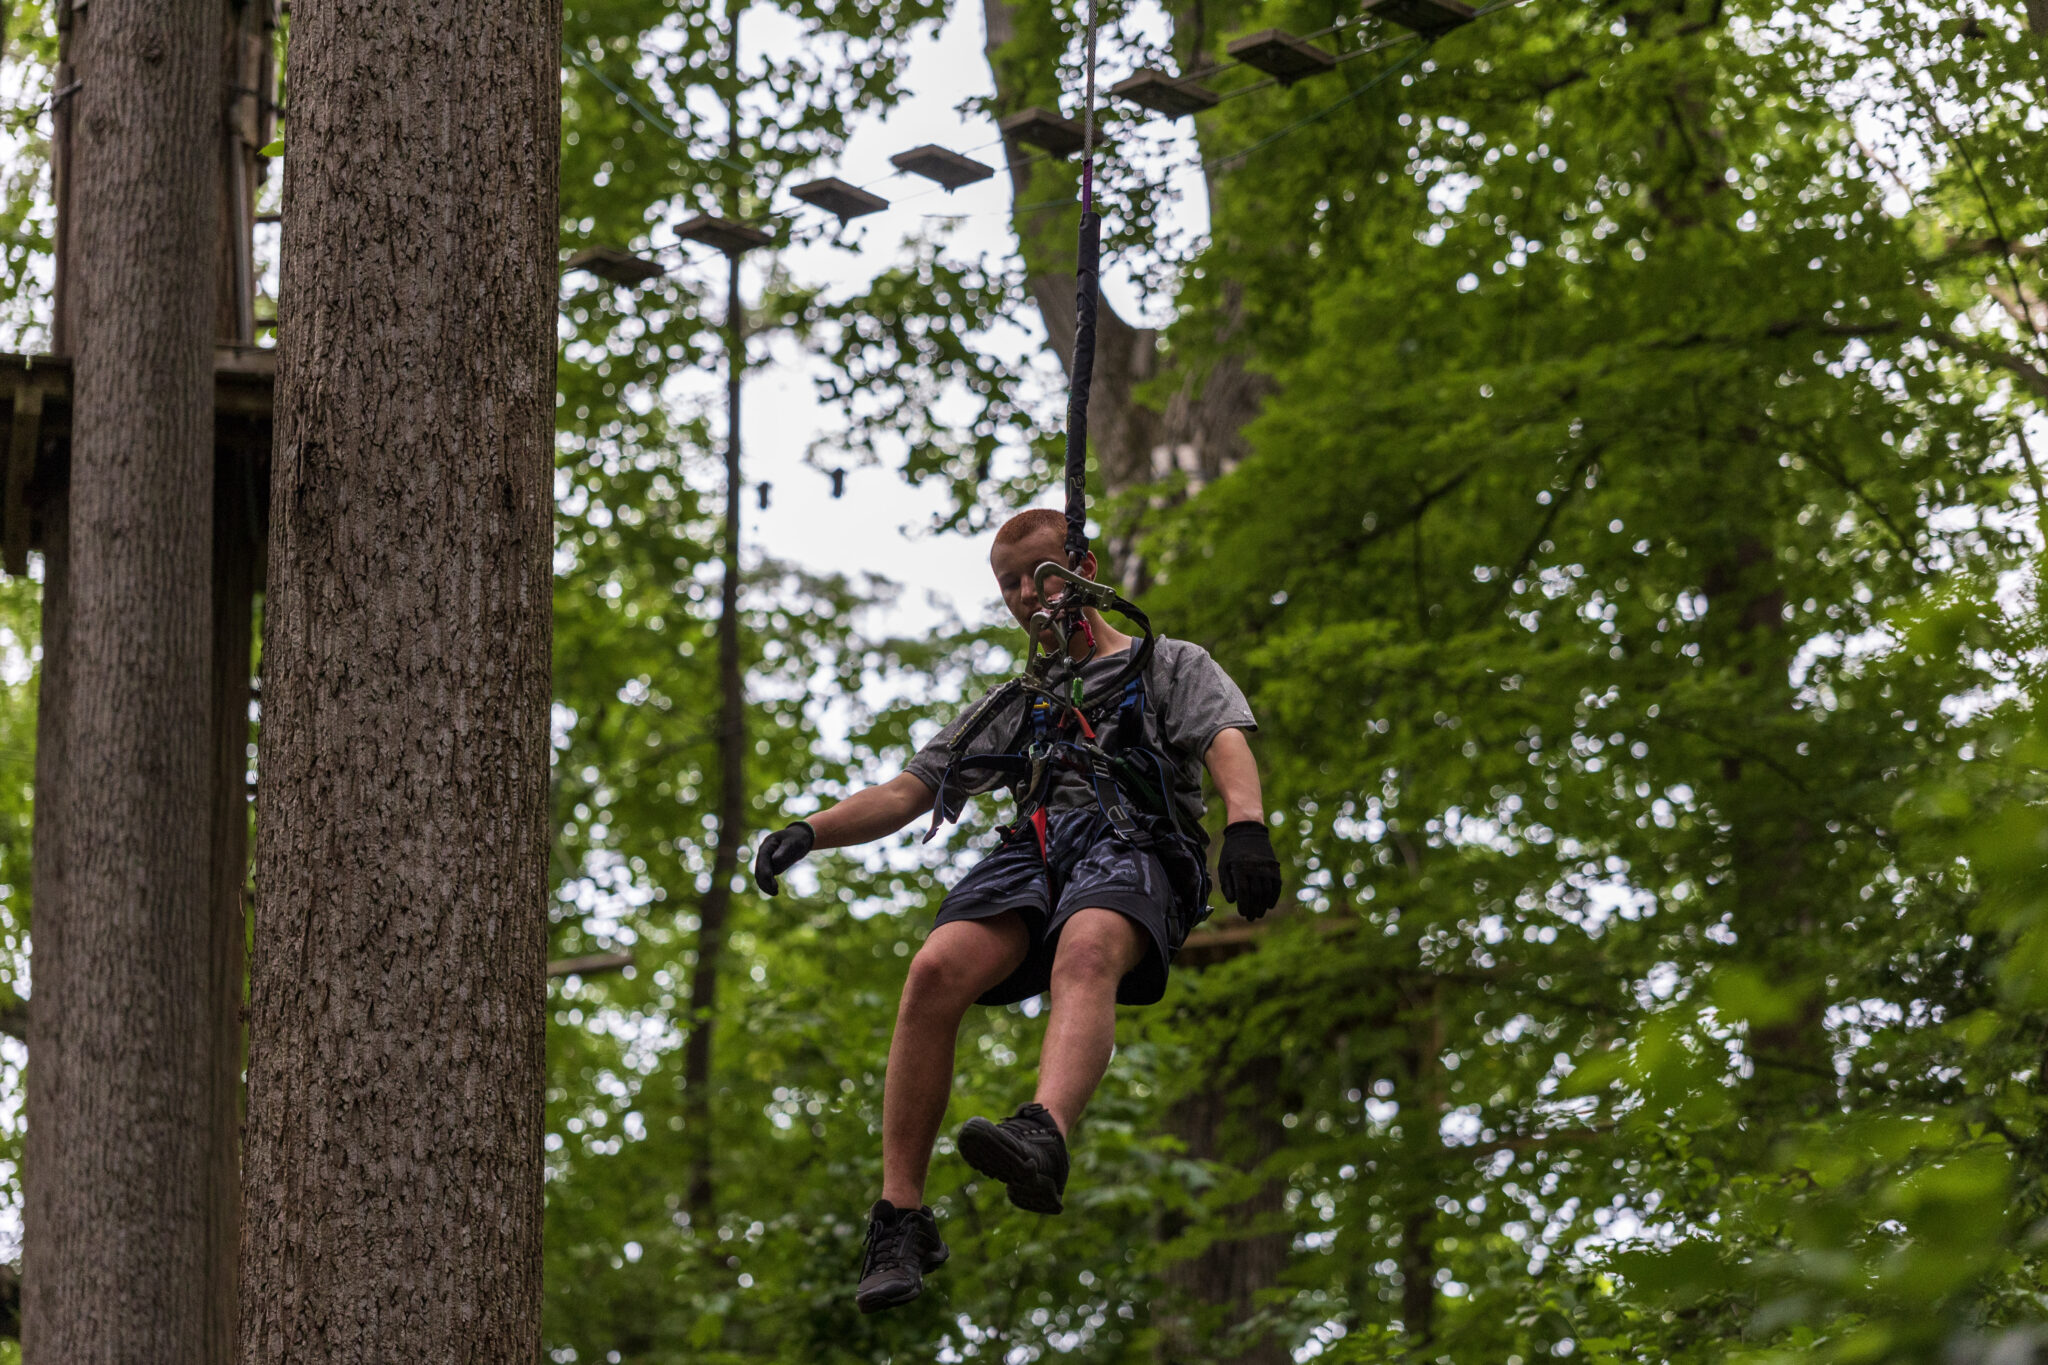 A man on a zip line in the woods participates in the P.L.E.D.G.E. Leadership Program.